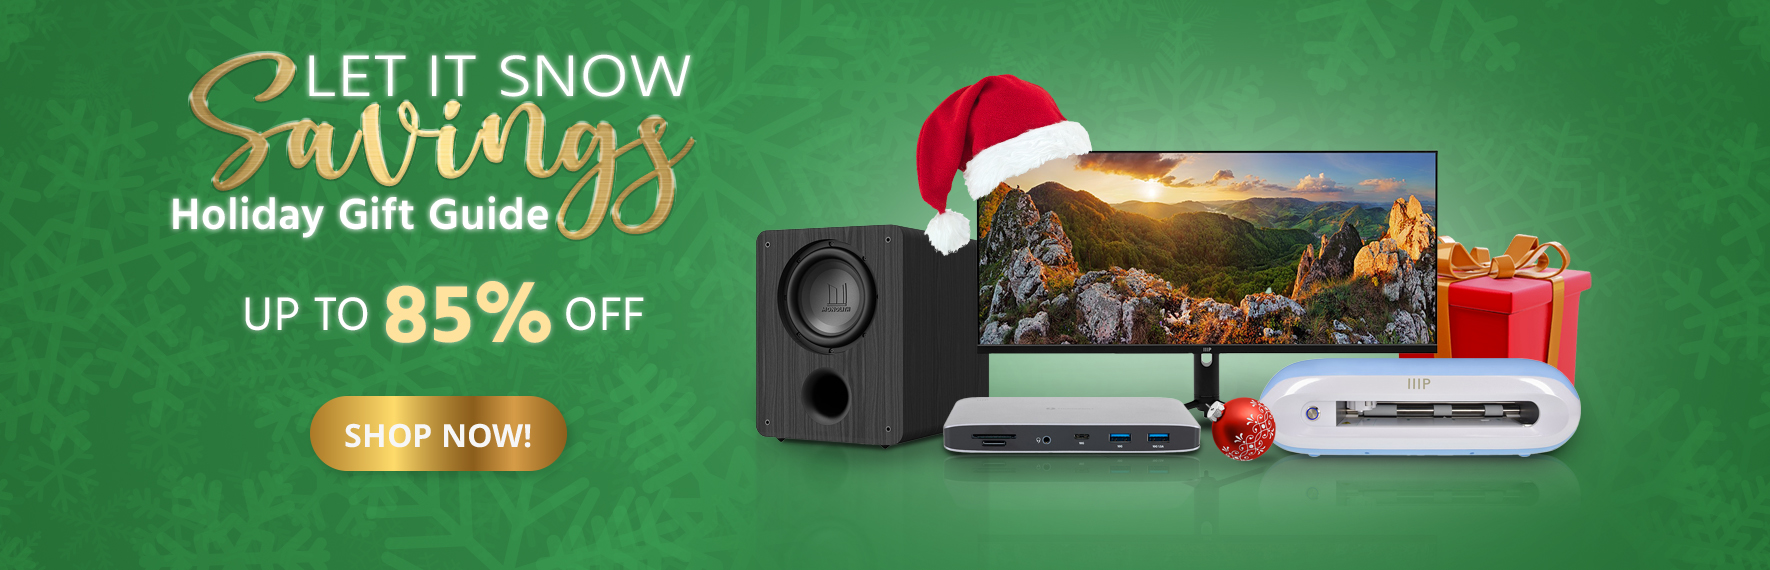 Let it Snow Savings! HOLIDAY GIFT GUIDE Up to 85% OFF Shop Now